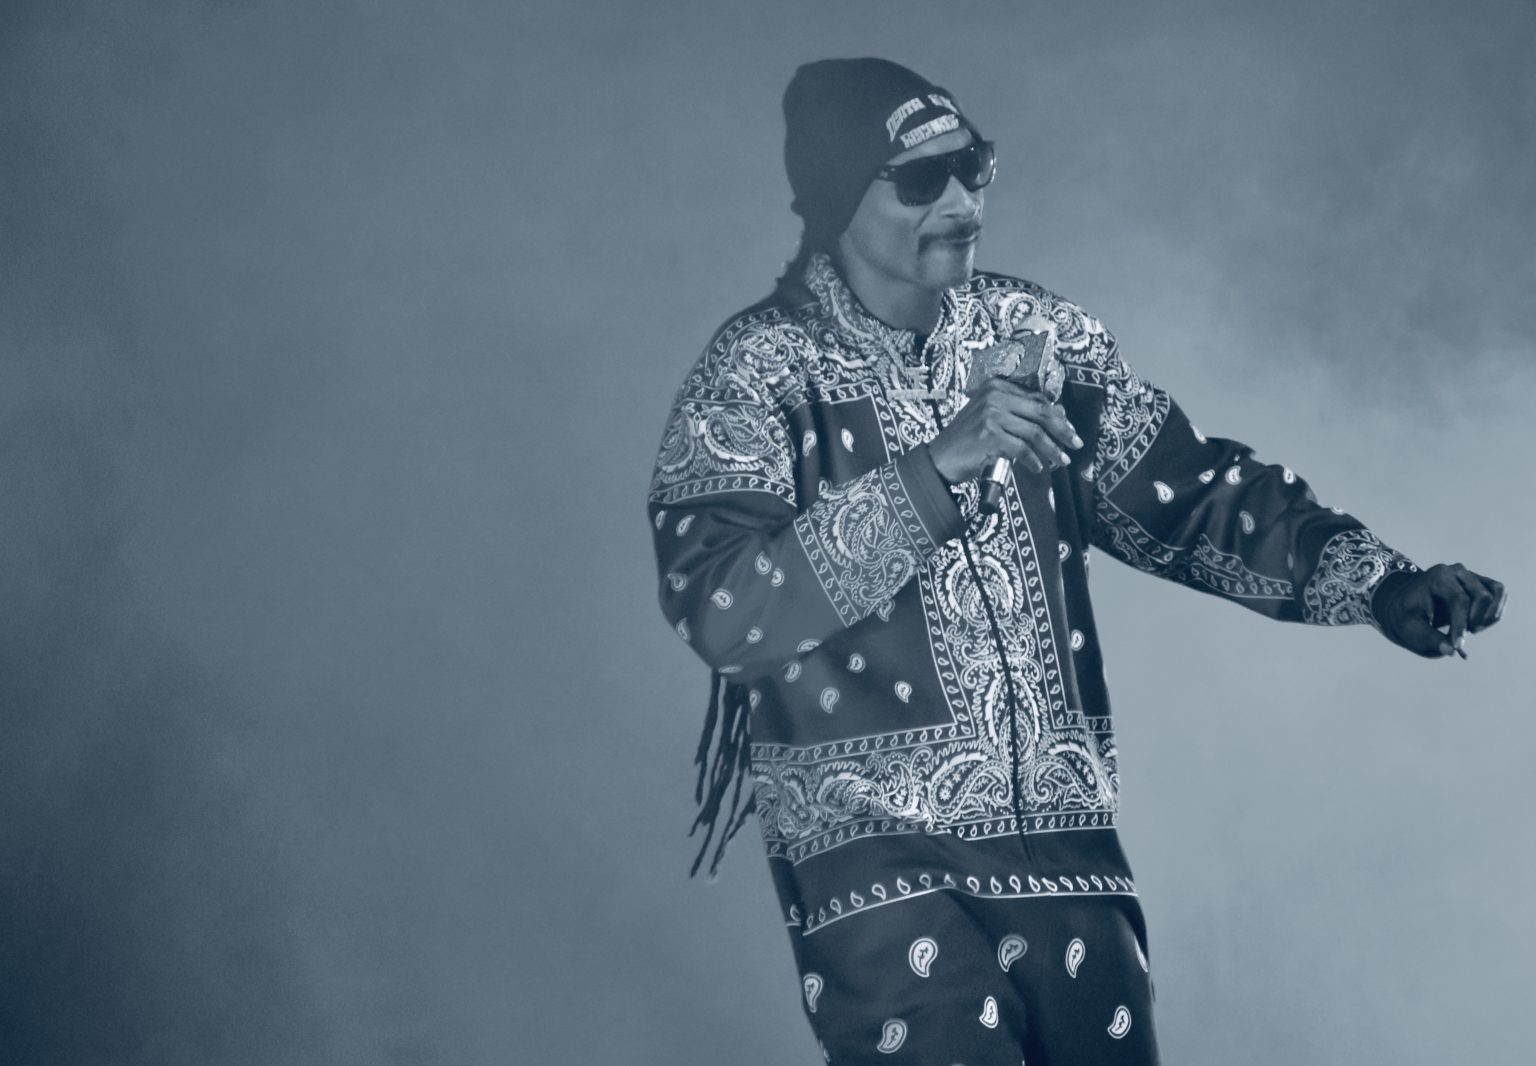 Concert Photos Snoop Dogg at Family Arena Review St. Louis